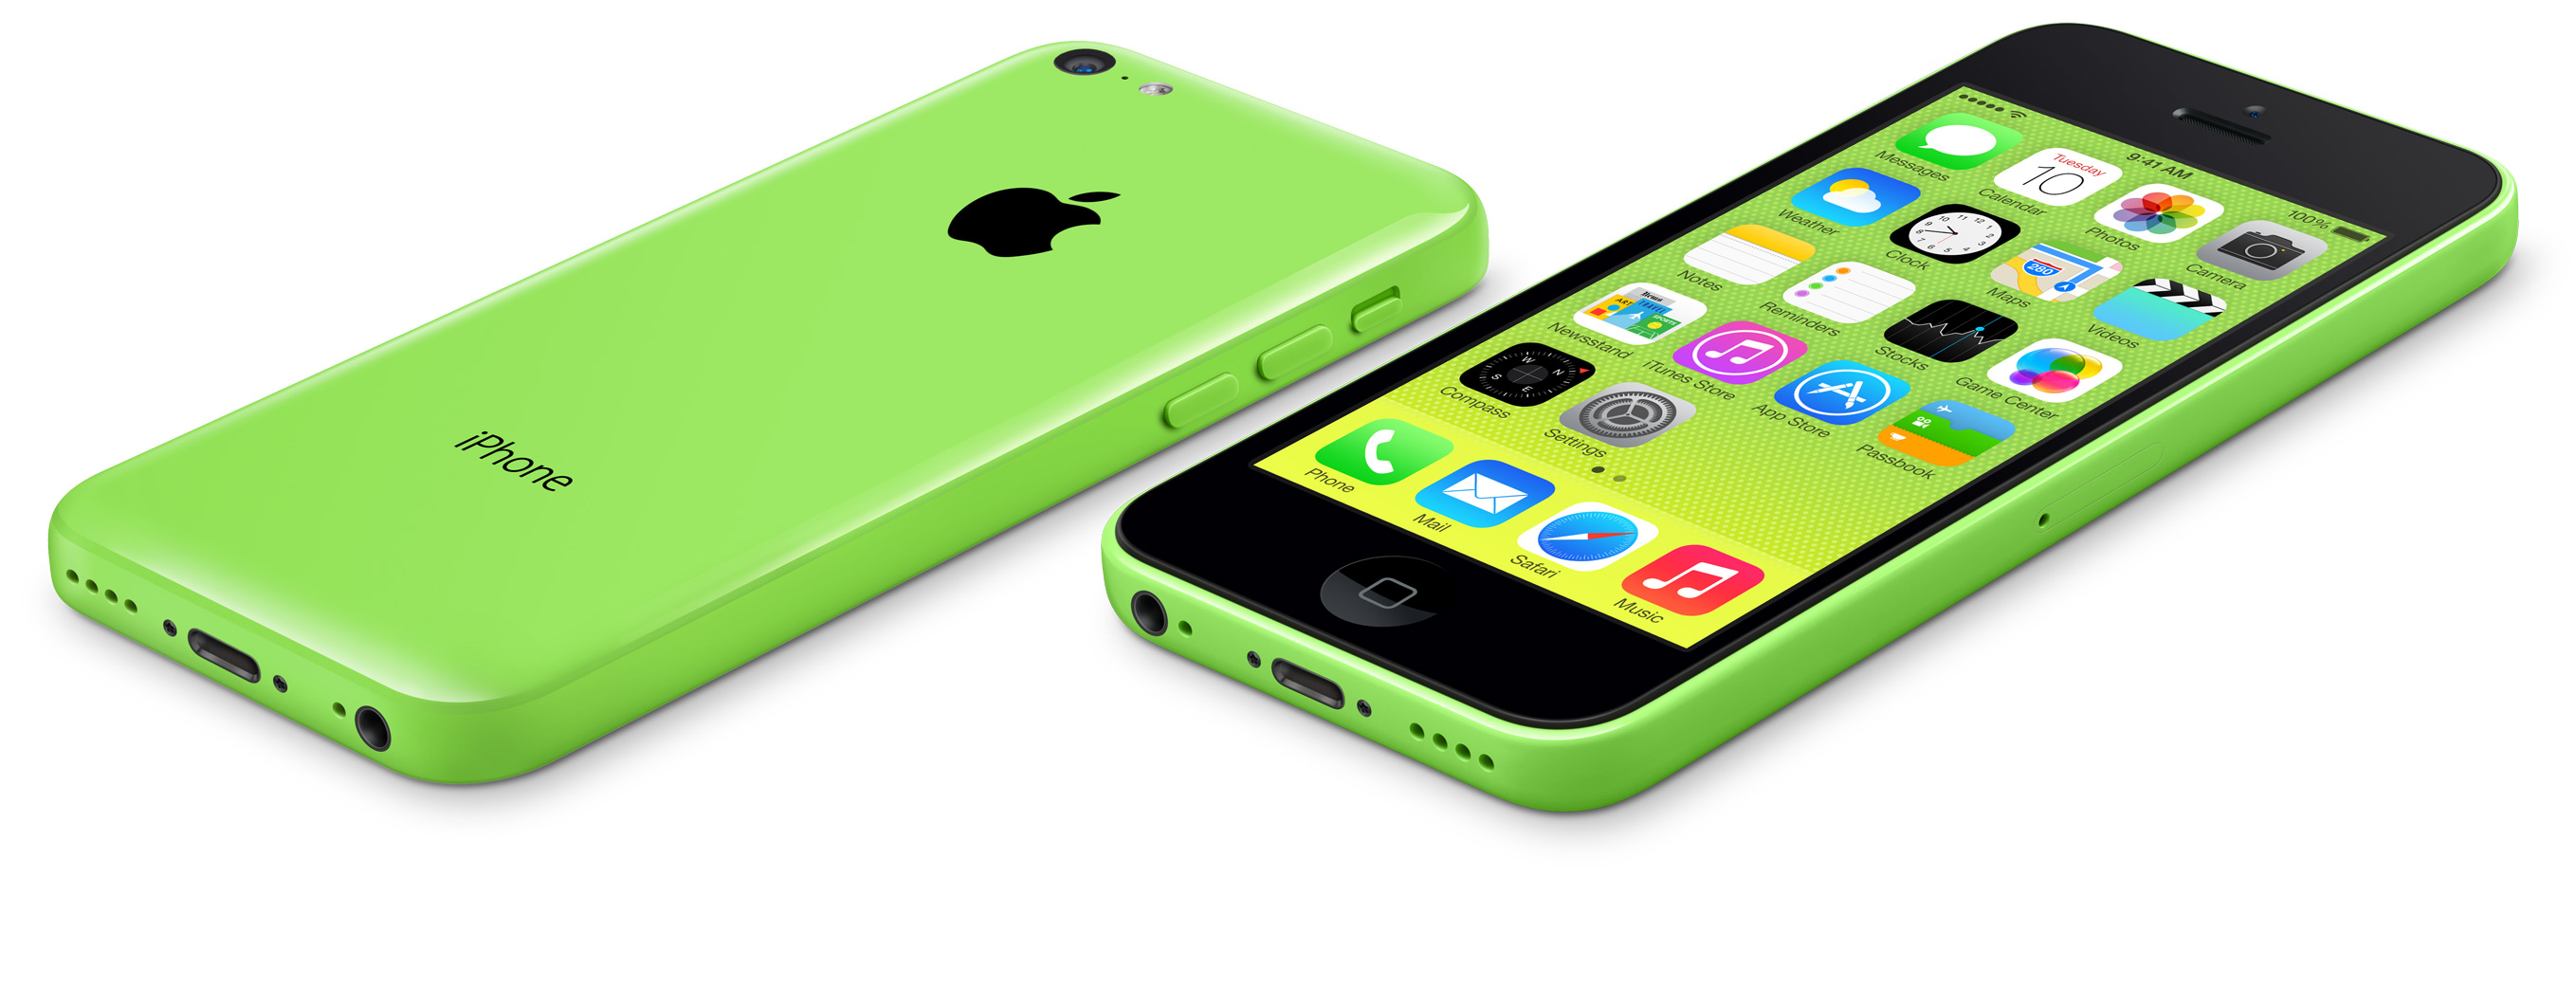 green iPhone 5c front and back